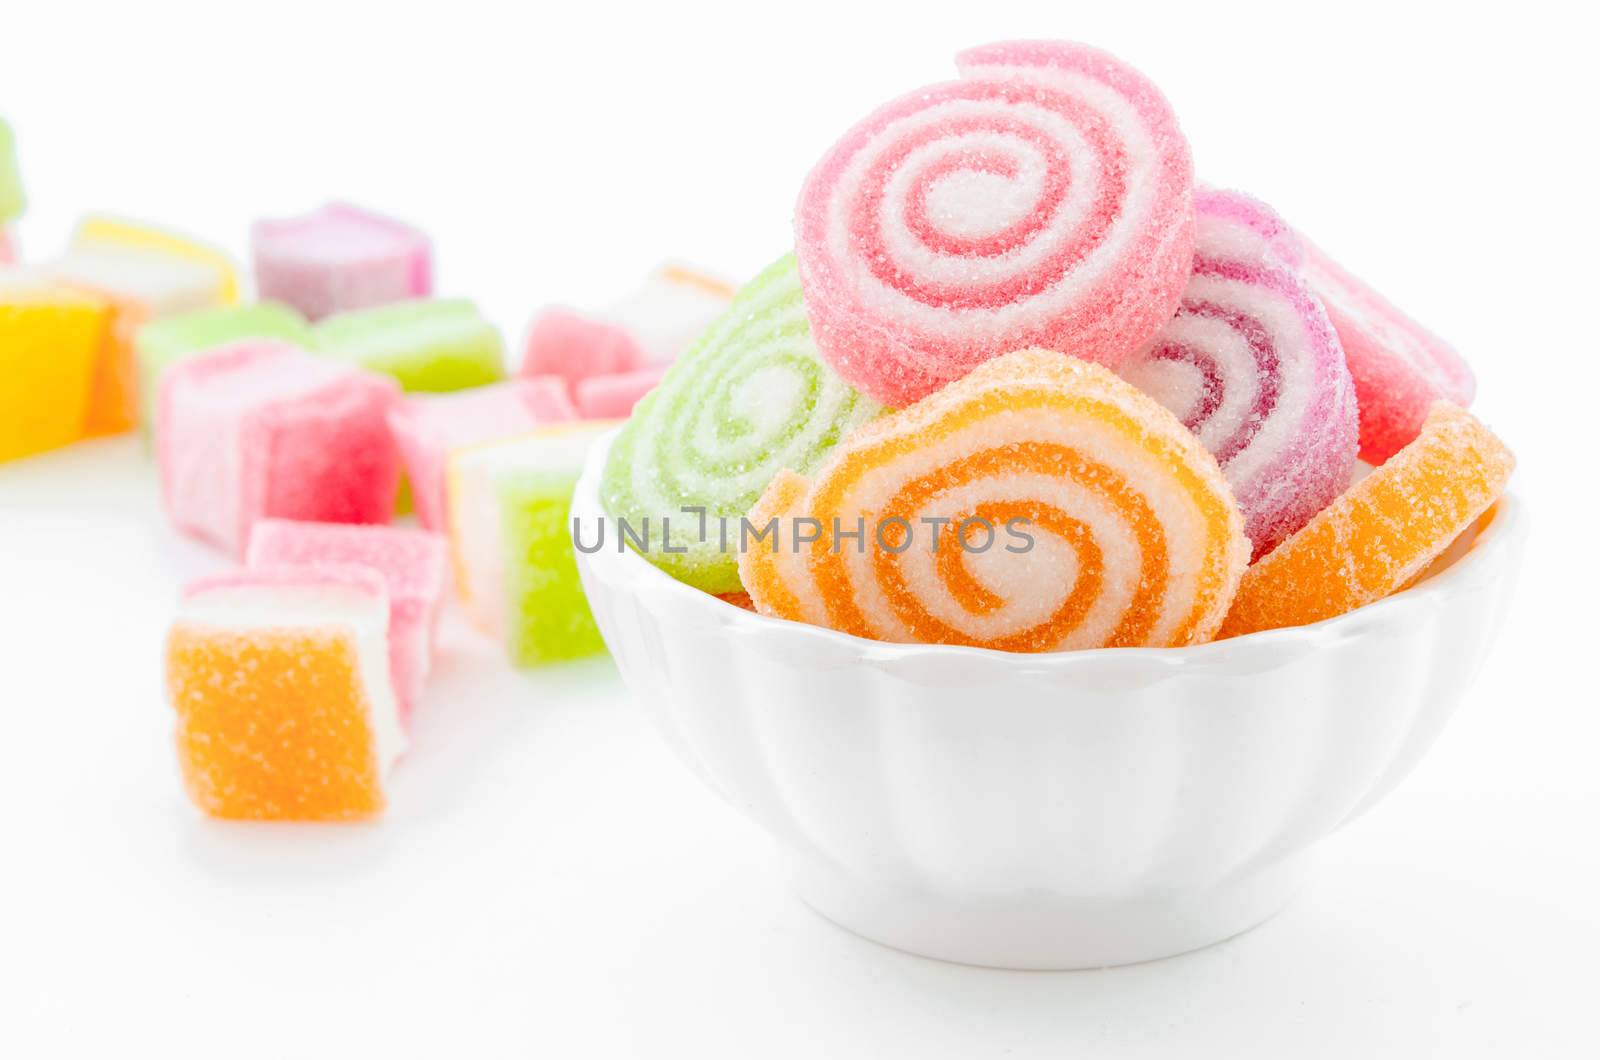 Jelly sweet, flavor fruit, candy dessert colorful. by Gamjai